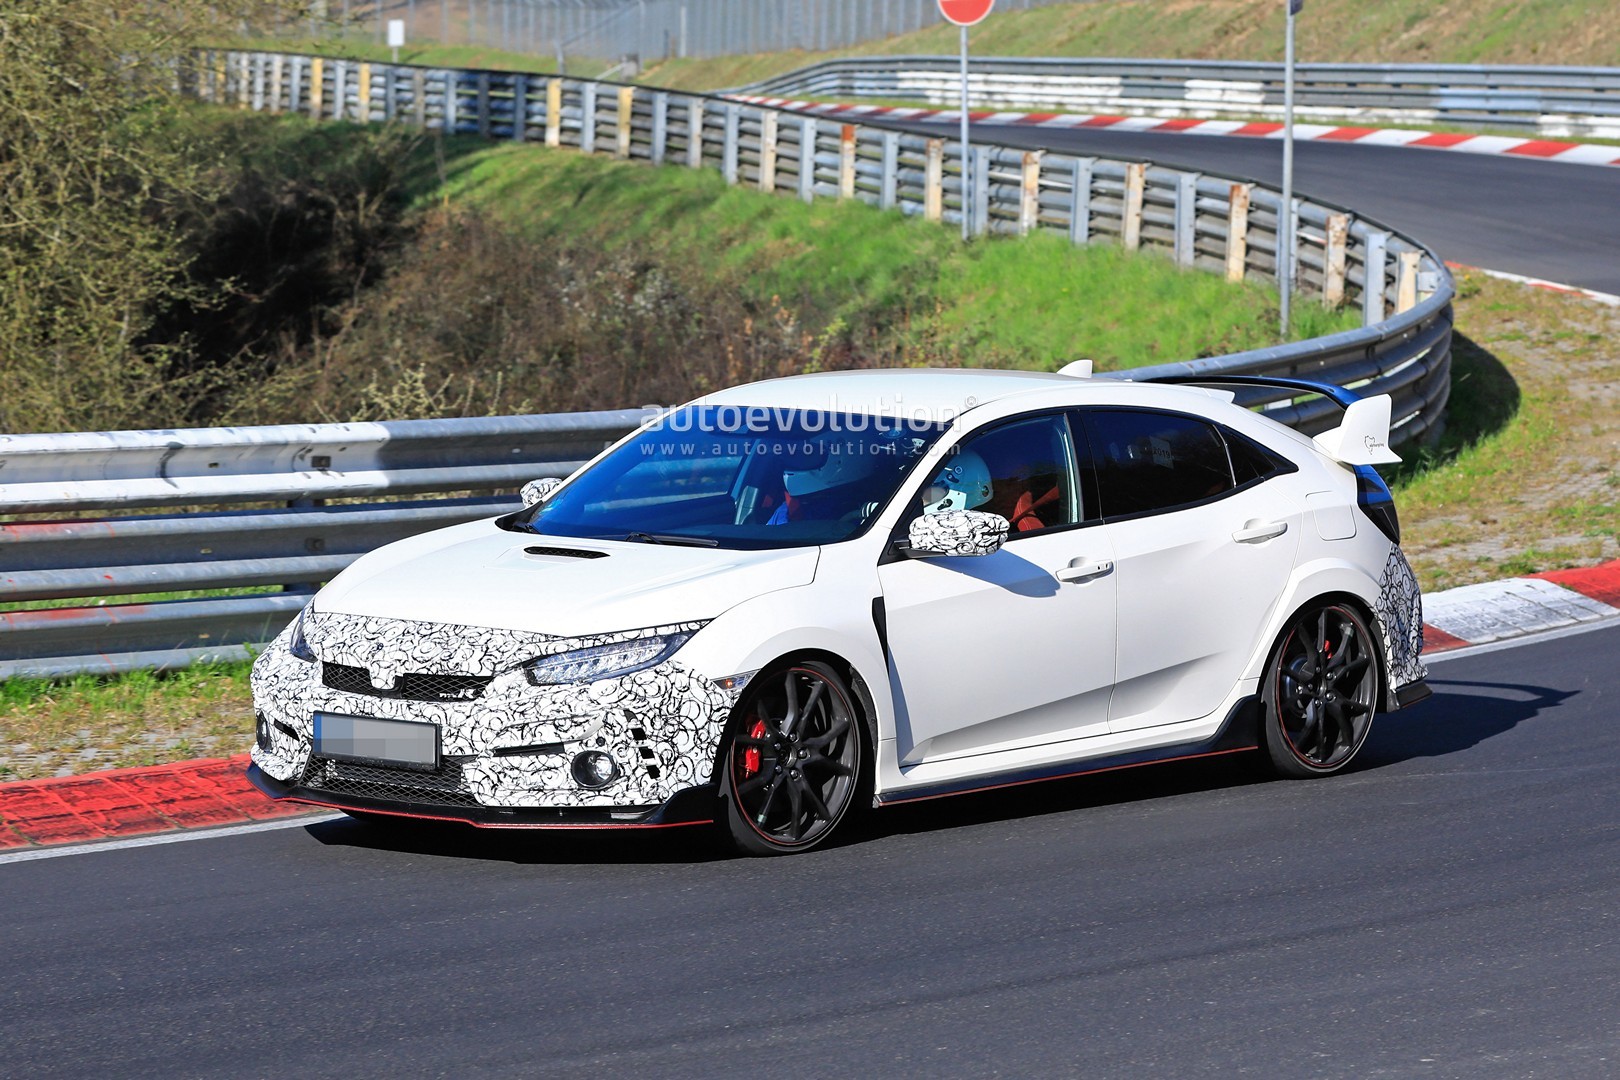 2020 Honda Civic Type R Prototypes Spied at the Nurburgring - autoevolution